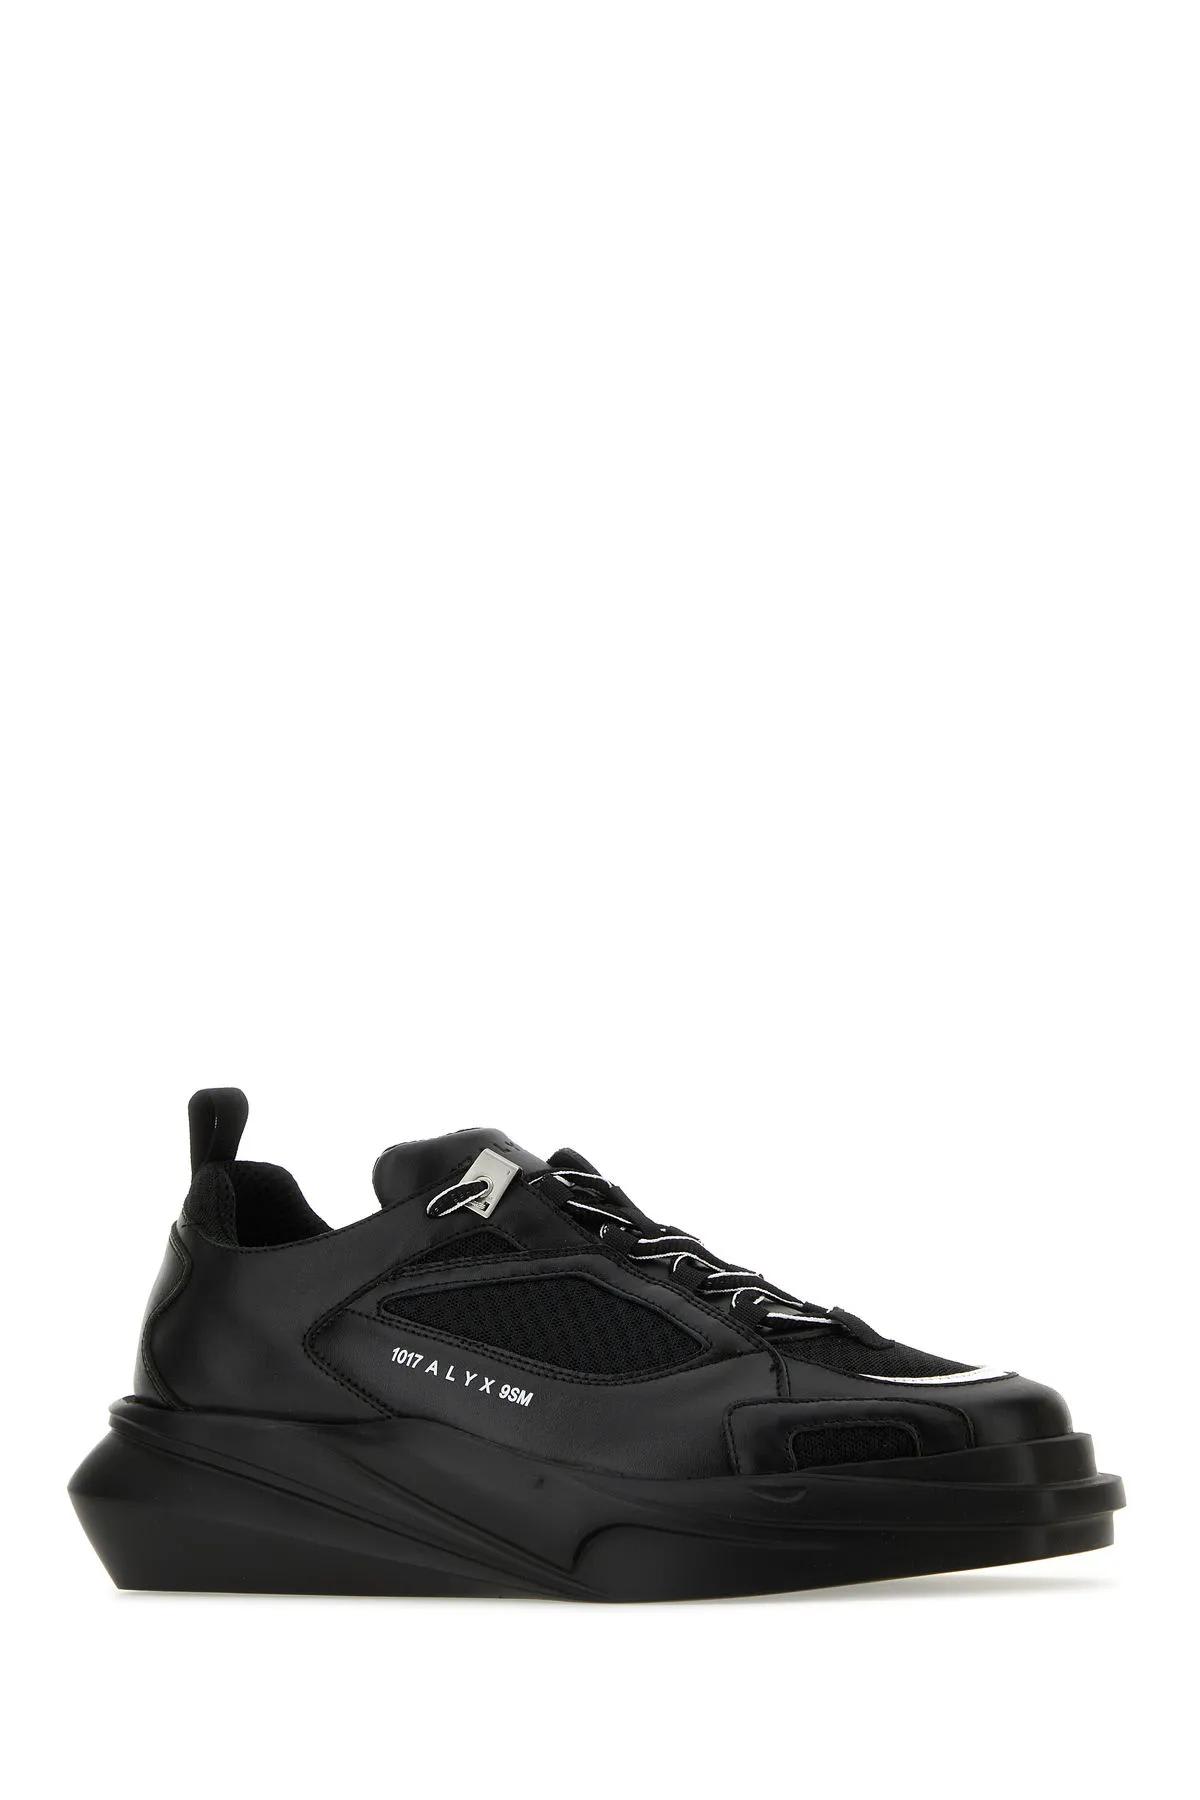 Shop Alyx Black Leather Hiking Sneakers In Black White